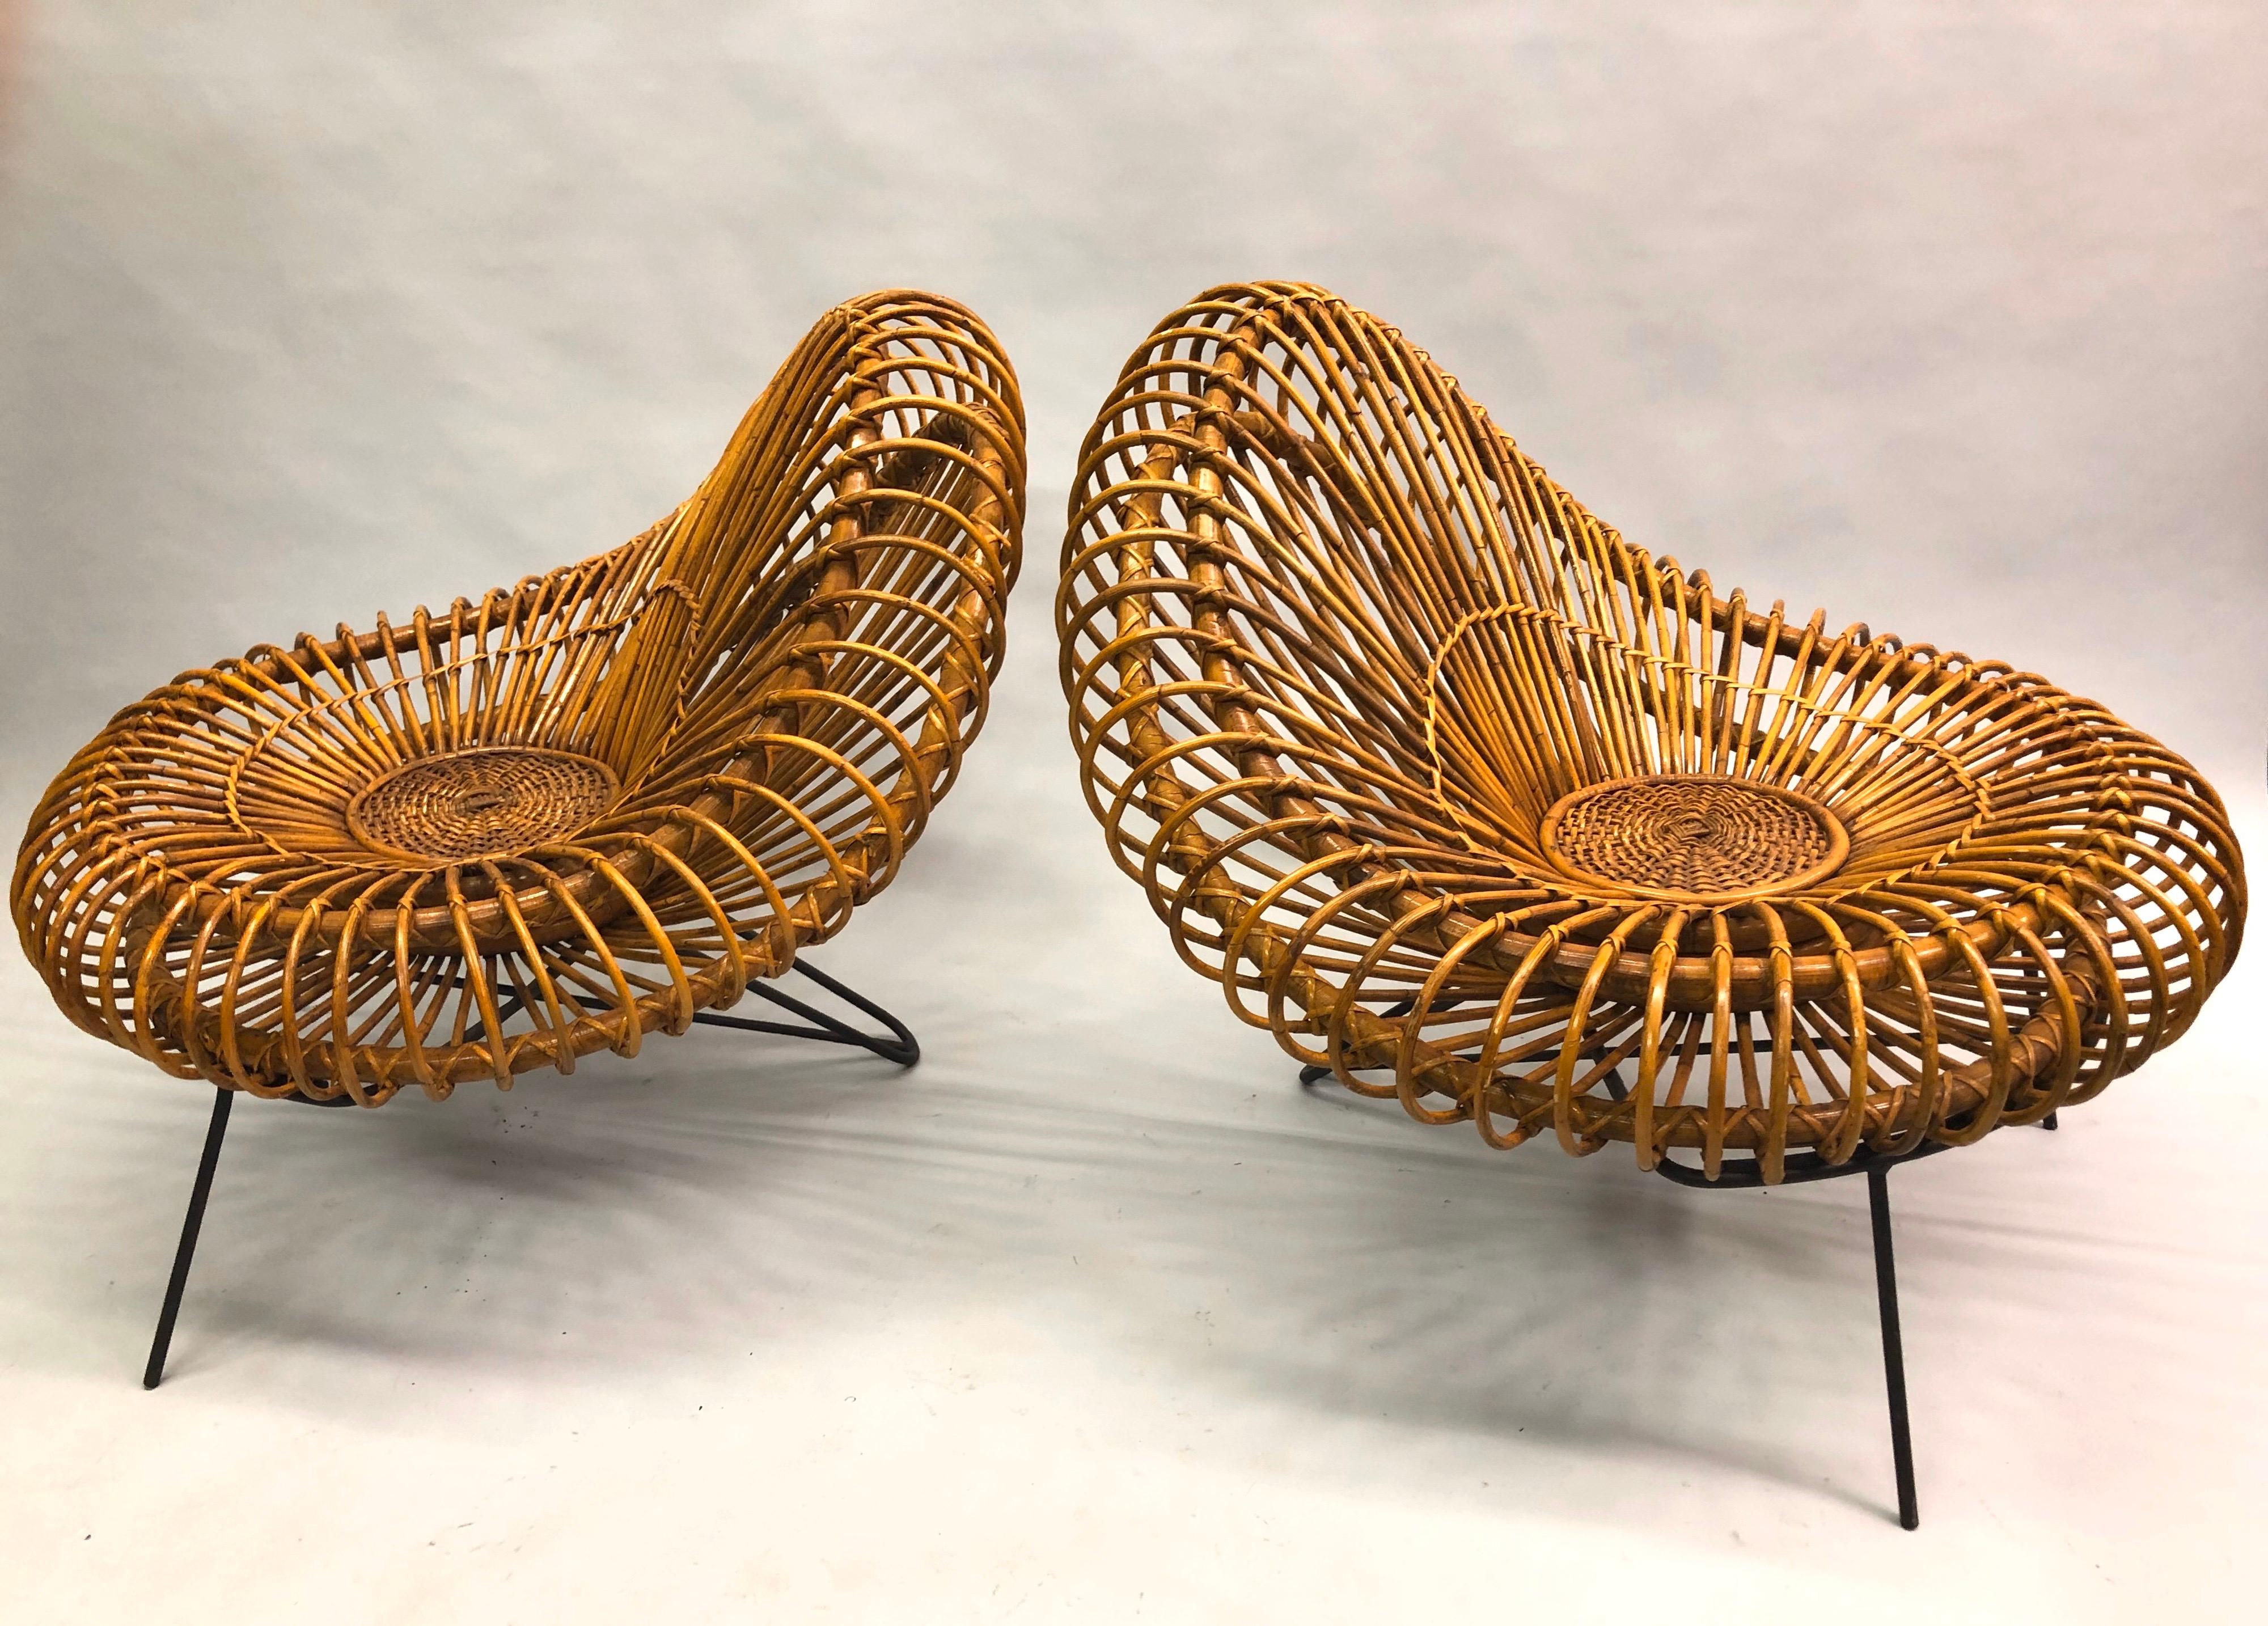 Pair of French Mid-century Rattan Lounge Chairs by Janine Abraham & Dirk Jan Roi 1